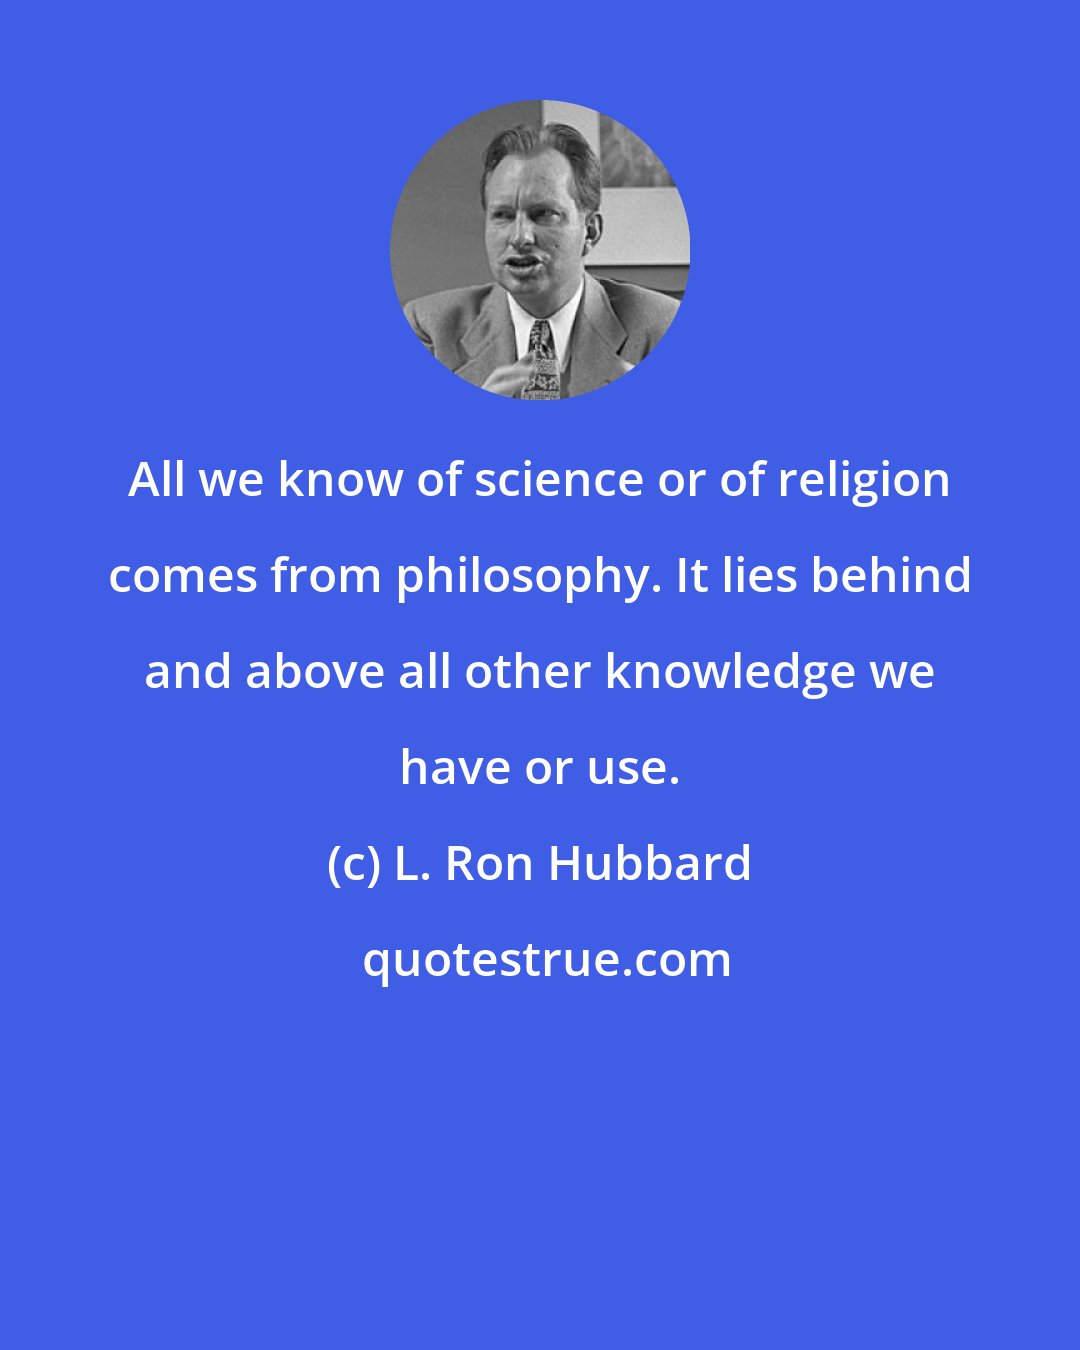 L. Ron Hubbard: All we know of science or of religion comes from philosophy. It lies behind and above all other knowledge we have or use.